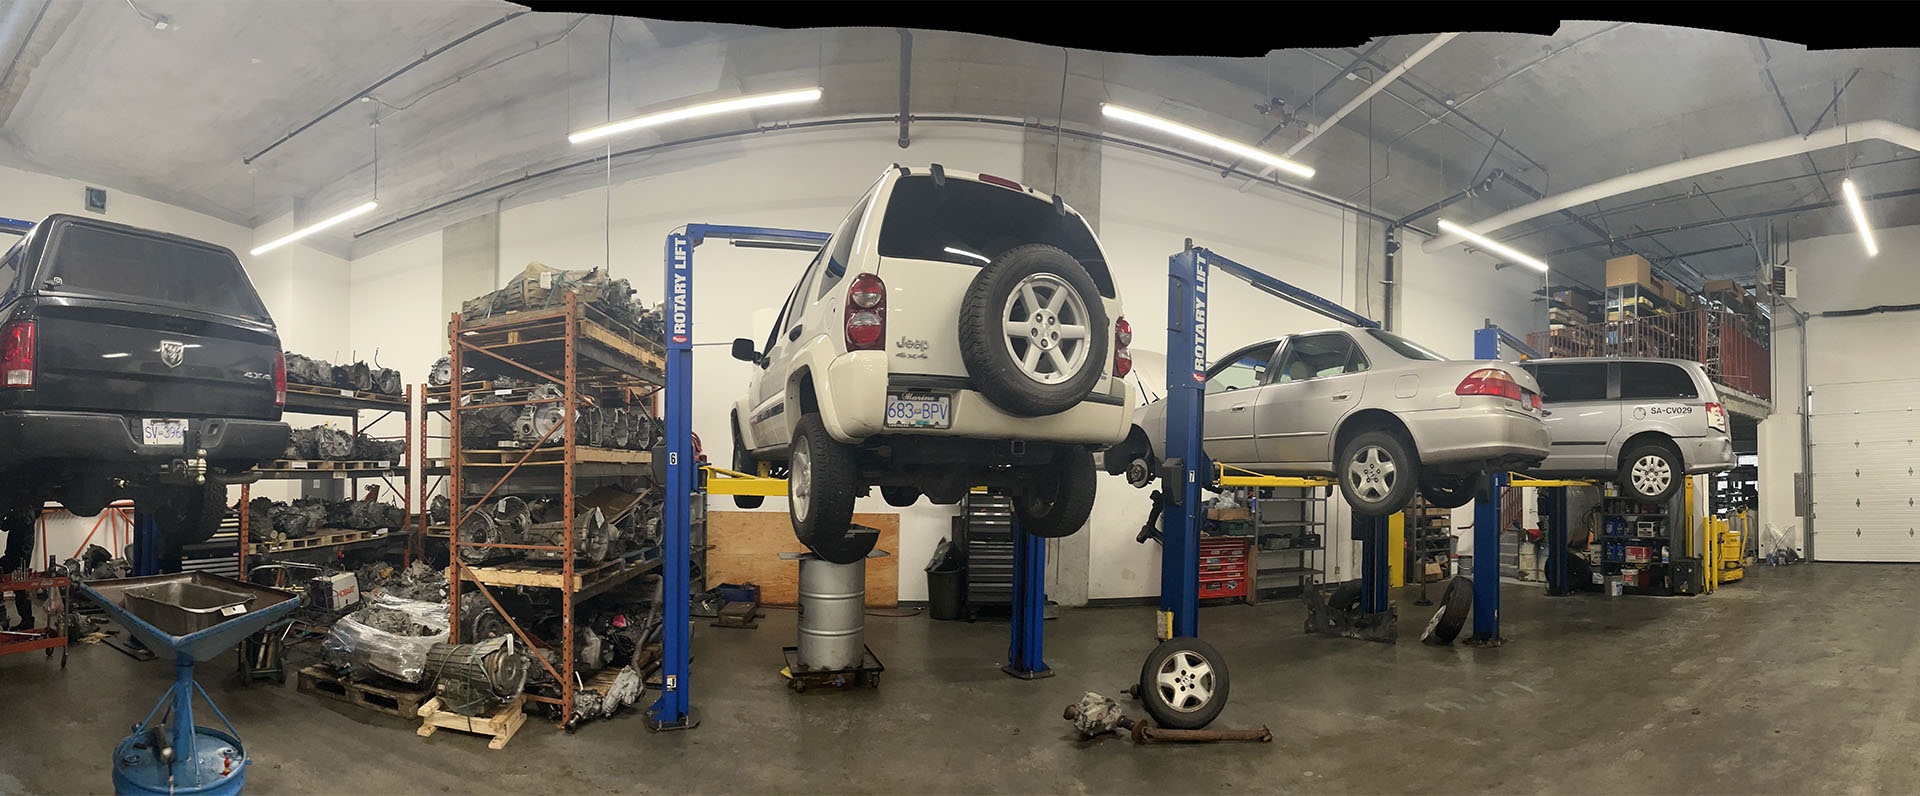 Vancouver Transmission Repair, Transmission Diagnostic and Oil Change Services